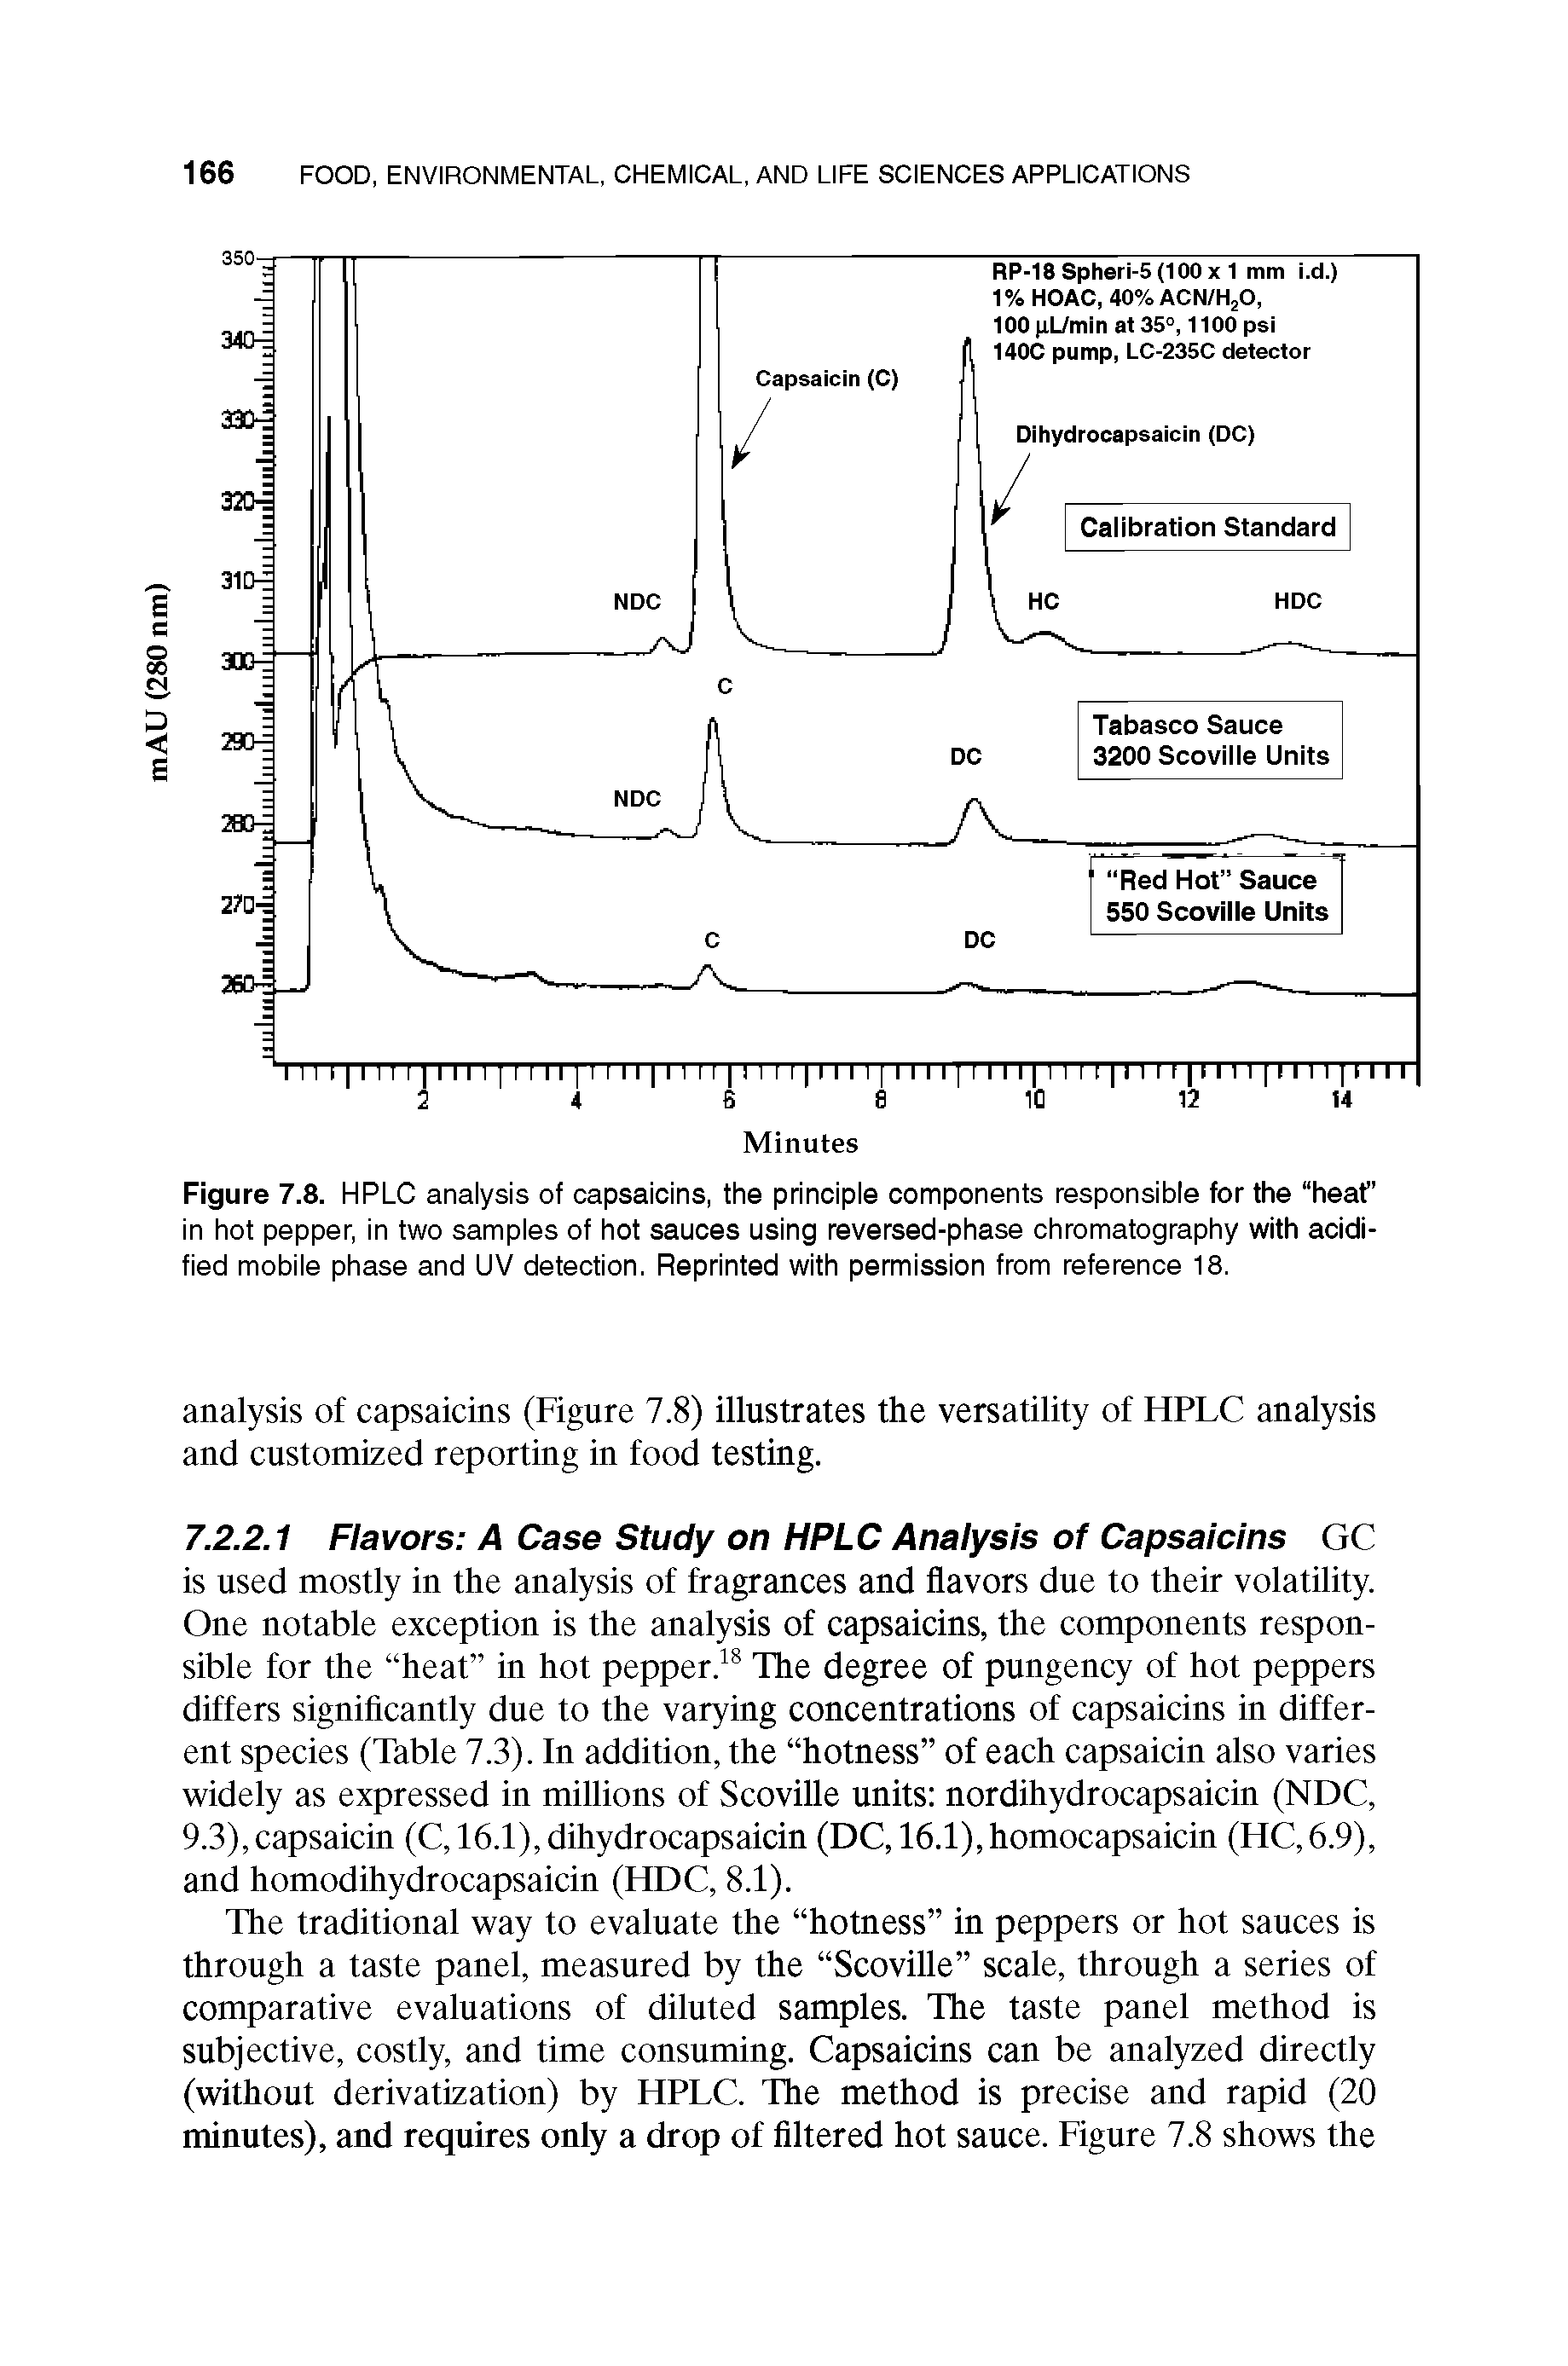 Figure 7.8. HPLC analysis of capsaicins, the principle components responsible for the heat in hot pepper, in two samples of hot sauces using reversed-phase chromatography with acidified mobile phase and UV detection. Reprinted with permission from reference 18.